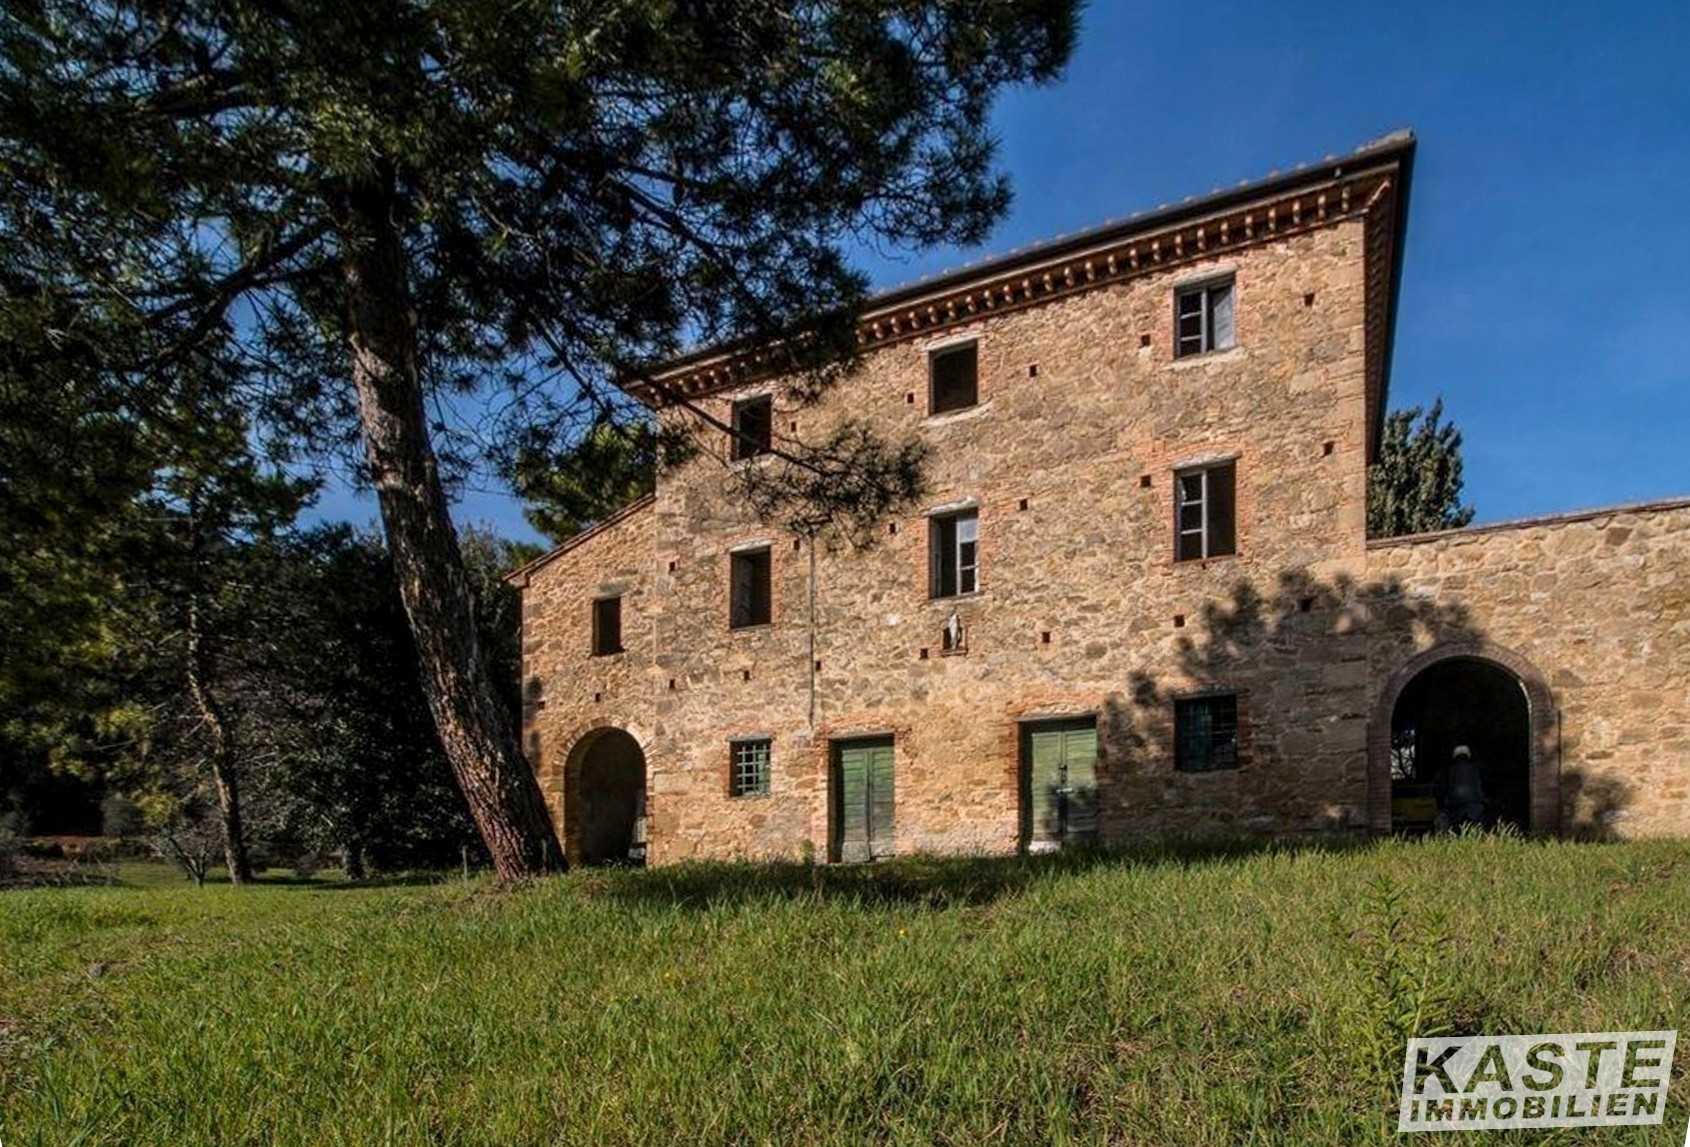 Photos Restoration property: Old country mansion in Rivalto